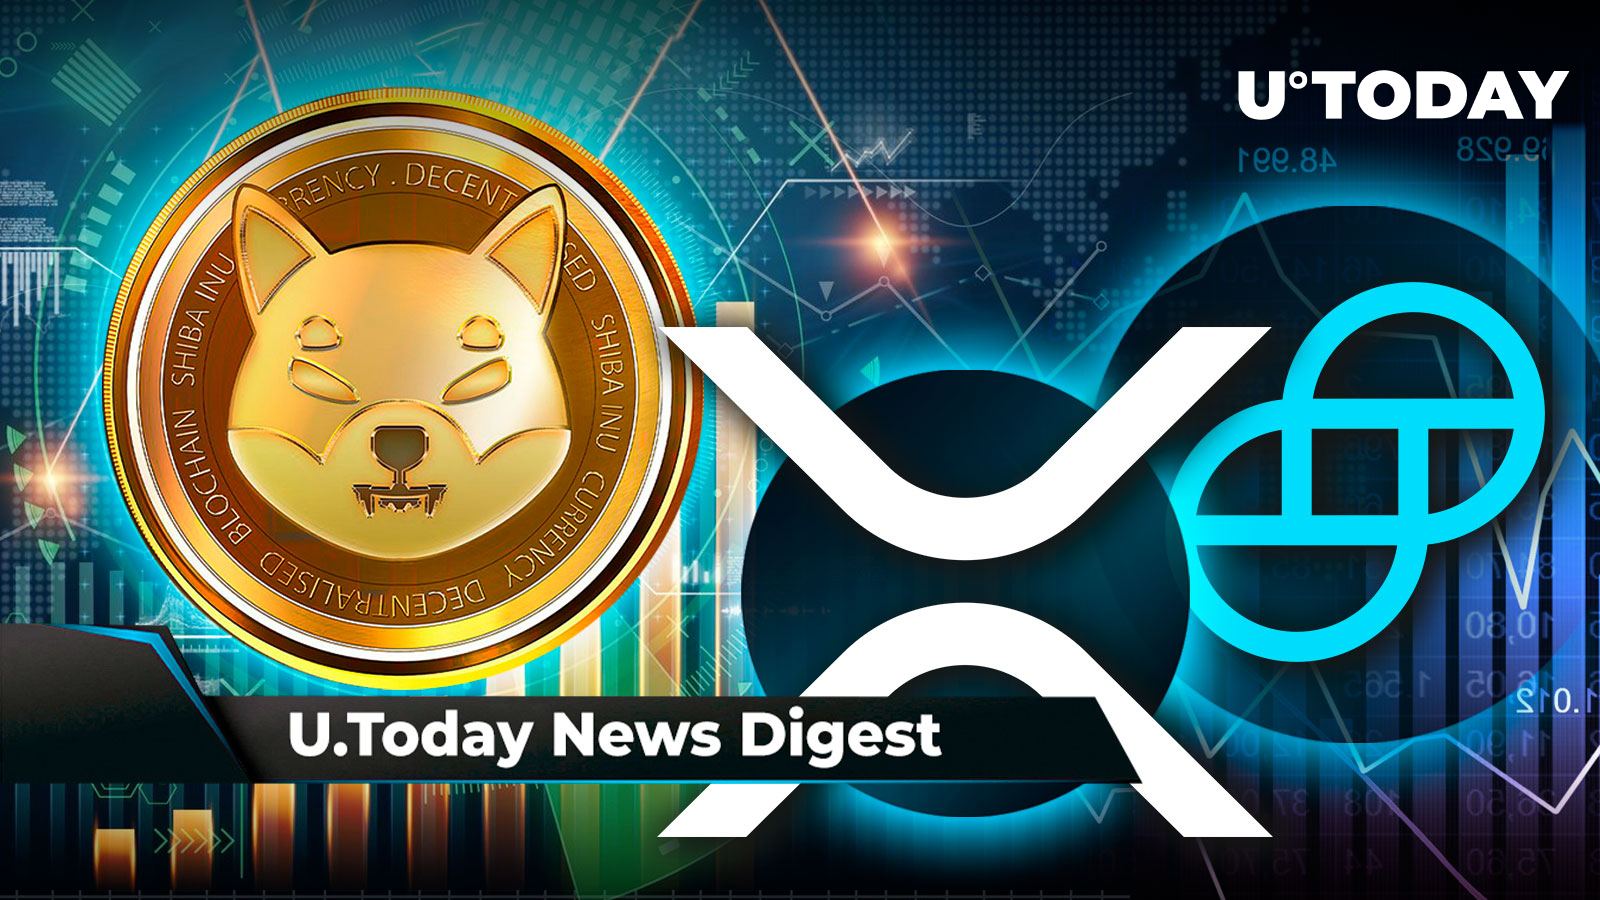 shib-on-verge-of-golden-cross-xrp-briefly-jumps-to-usd50-on-gemini-cardano-successfully-mints-btc-crypto-news-digest-by-u-today